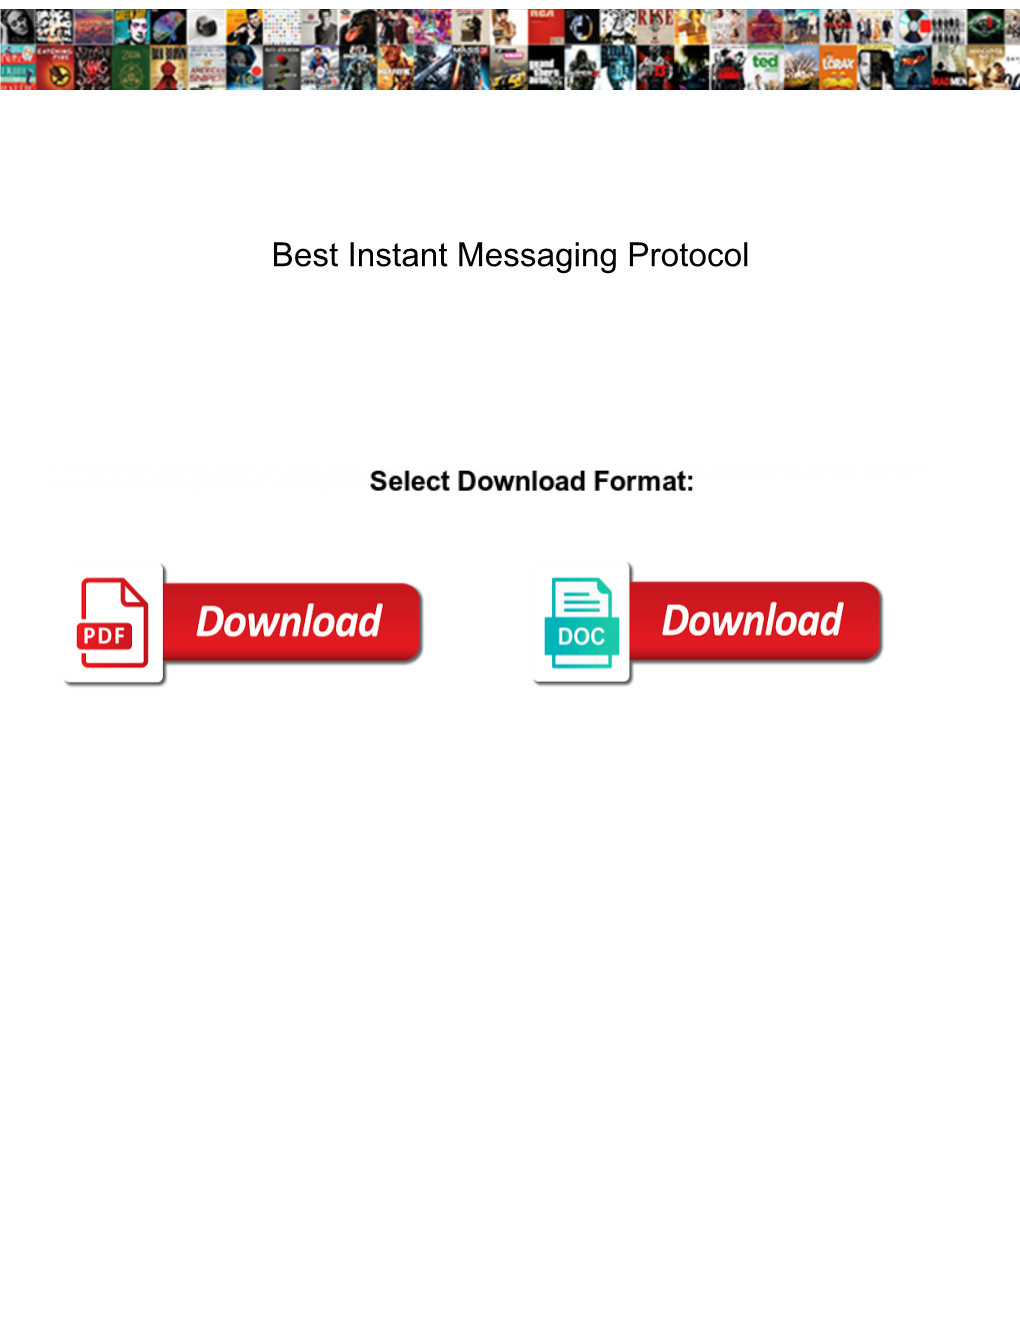 Best Instant Messaging Protocol